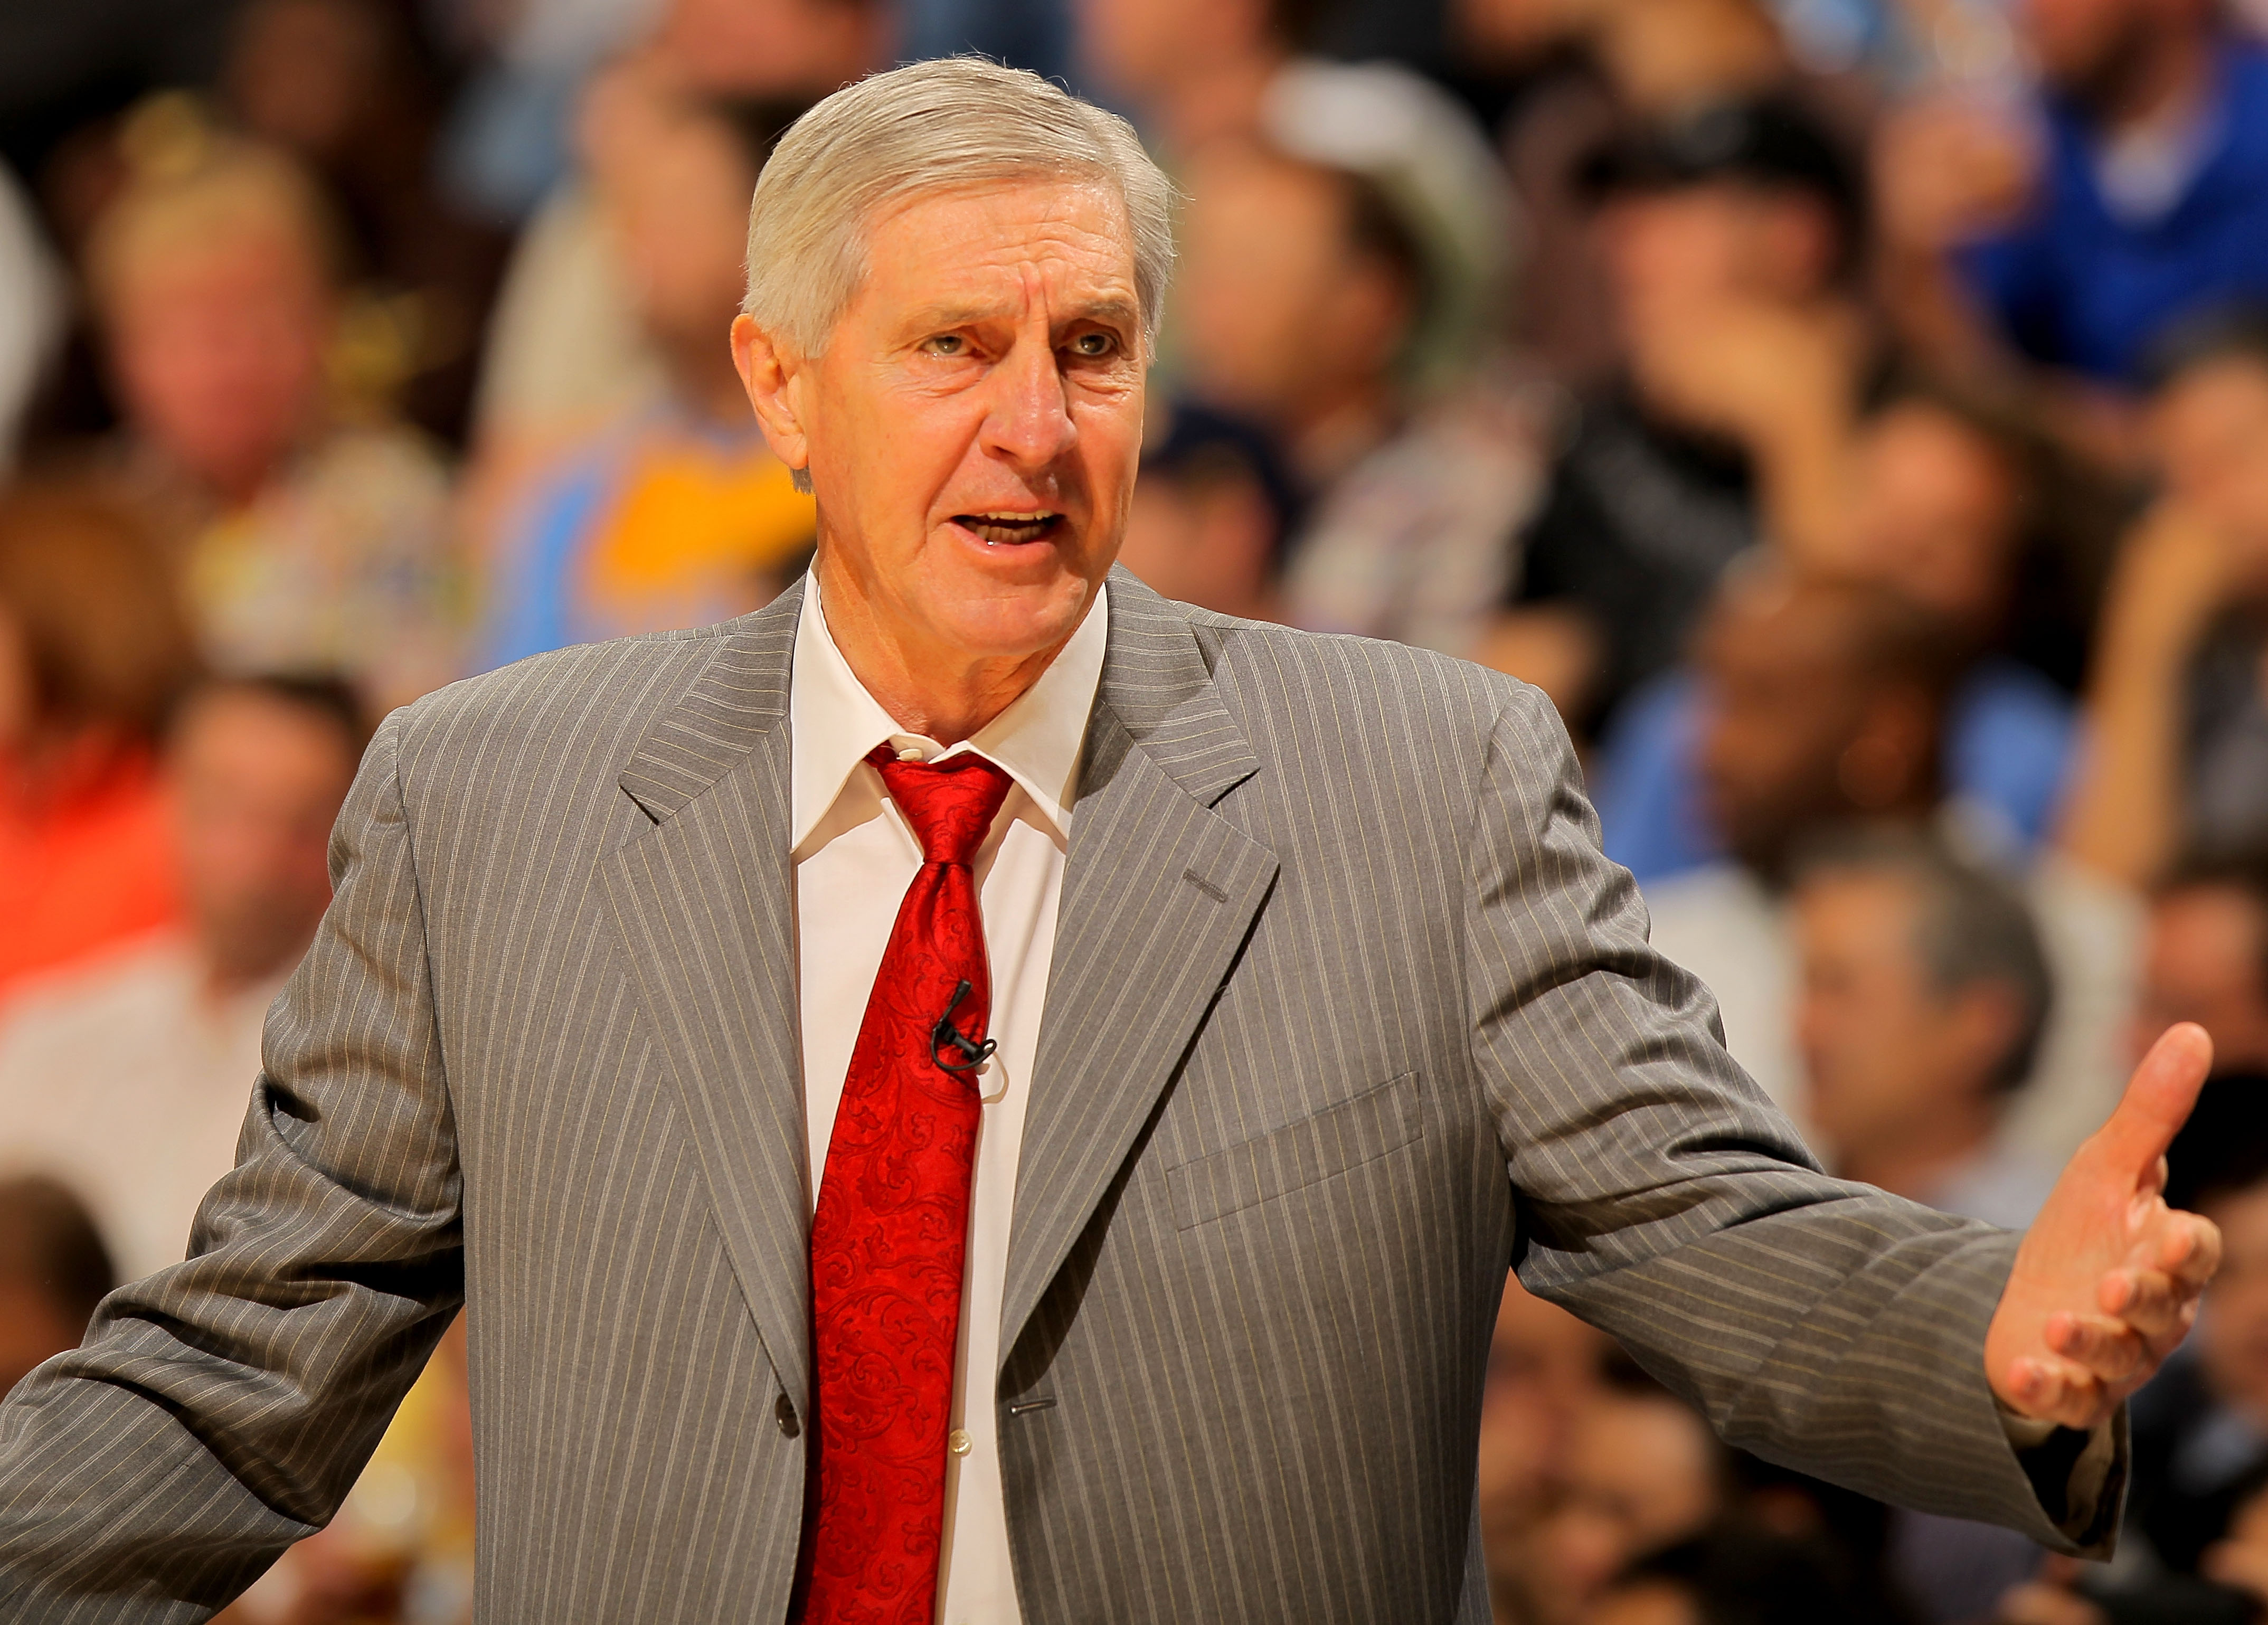 DENVER - APRIL 19:  Head coach Jerry Sloan of the Utah Jazz leads his team against the Denver Nuggets in Game Two of the NBA Western Conference Quarterfinals at the Pepsi Center on April 19, 2010 in Denver, Colorado. NOTE TO USER: User expressly acknowled